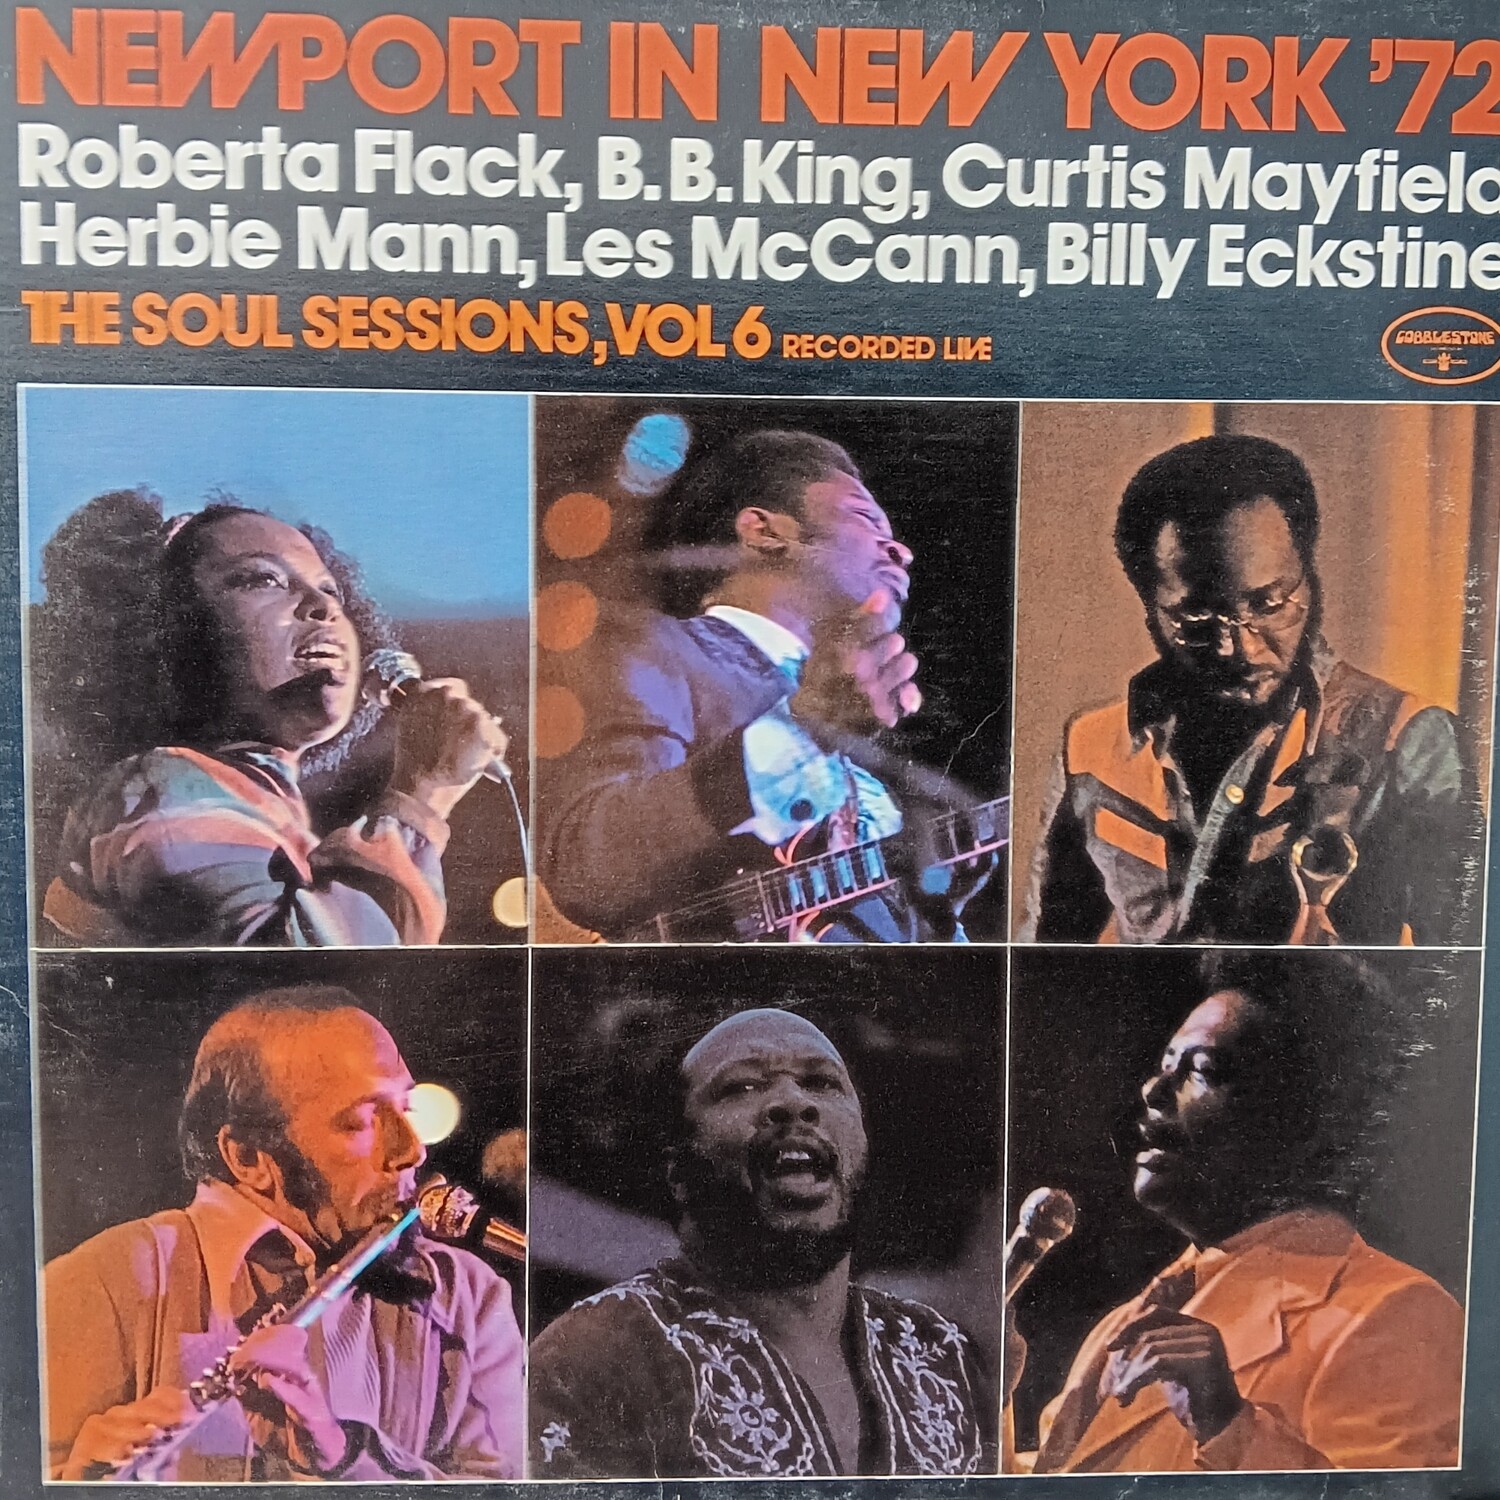 VARIOUS - Newport in New York 72, The Soul Sessions vol 6